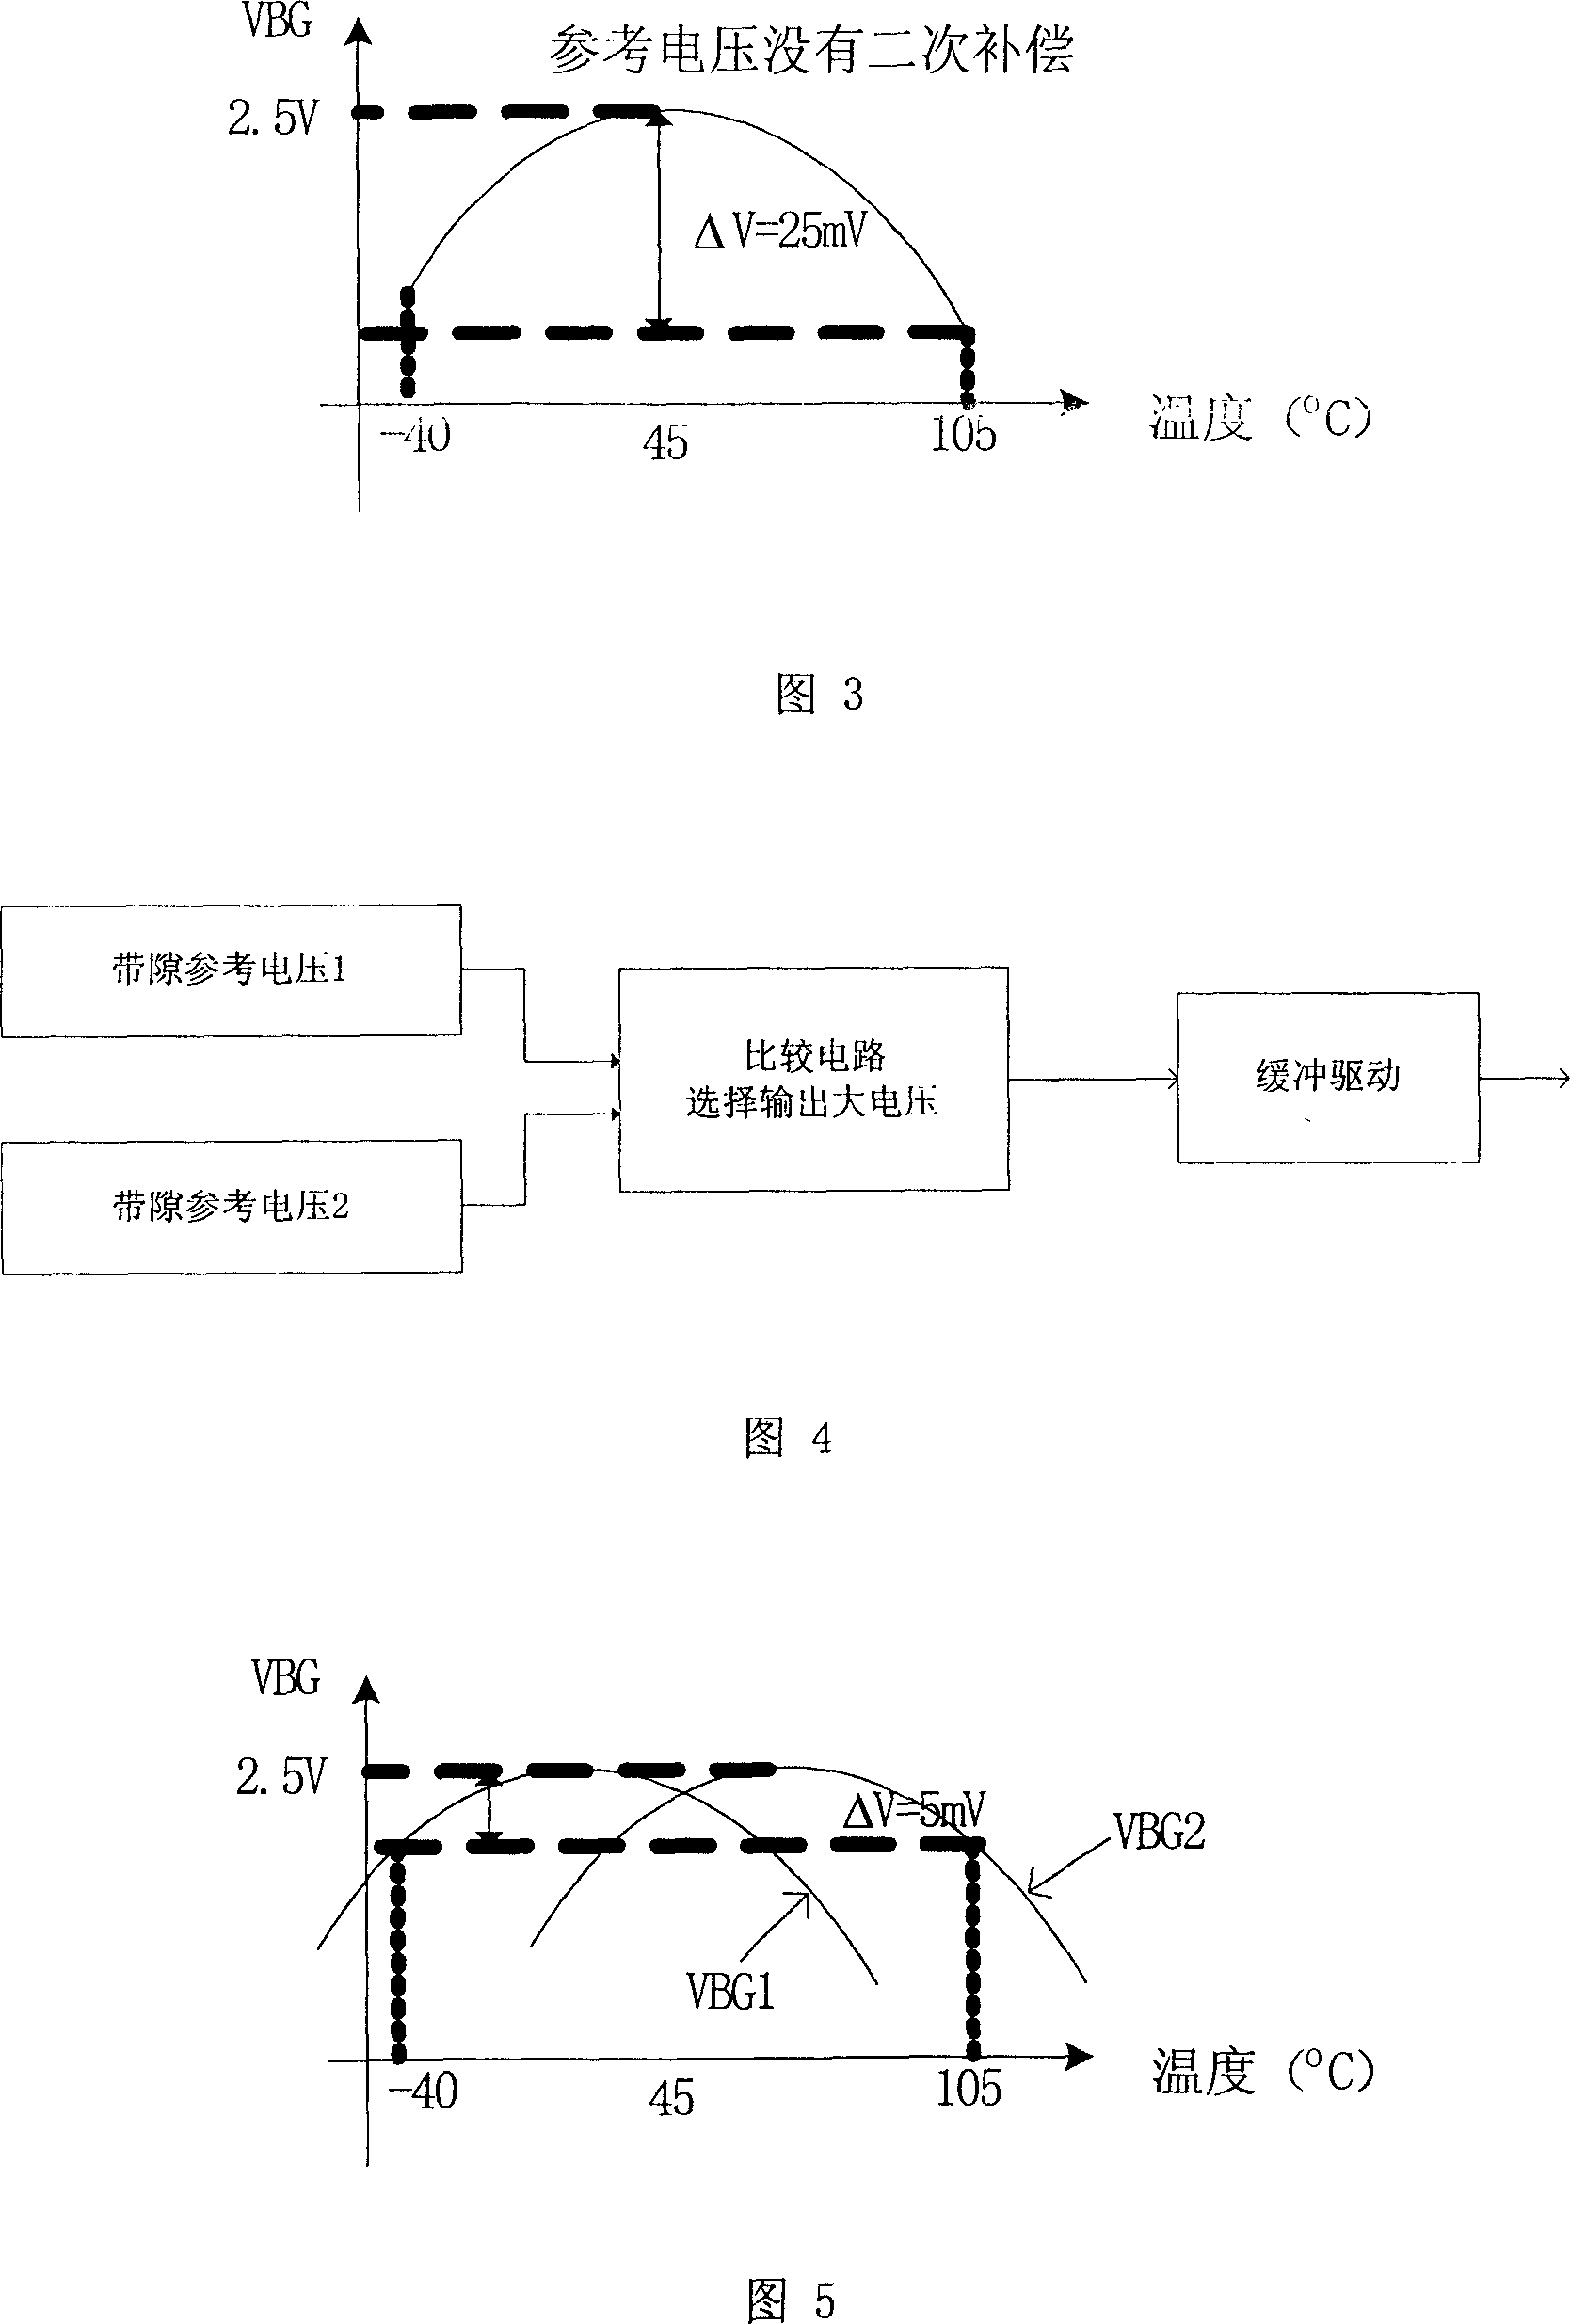 Reference voltage source for low temperature coefficient with gap